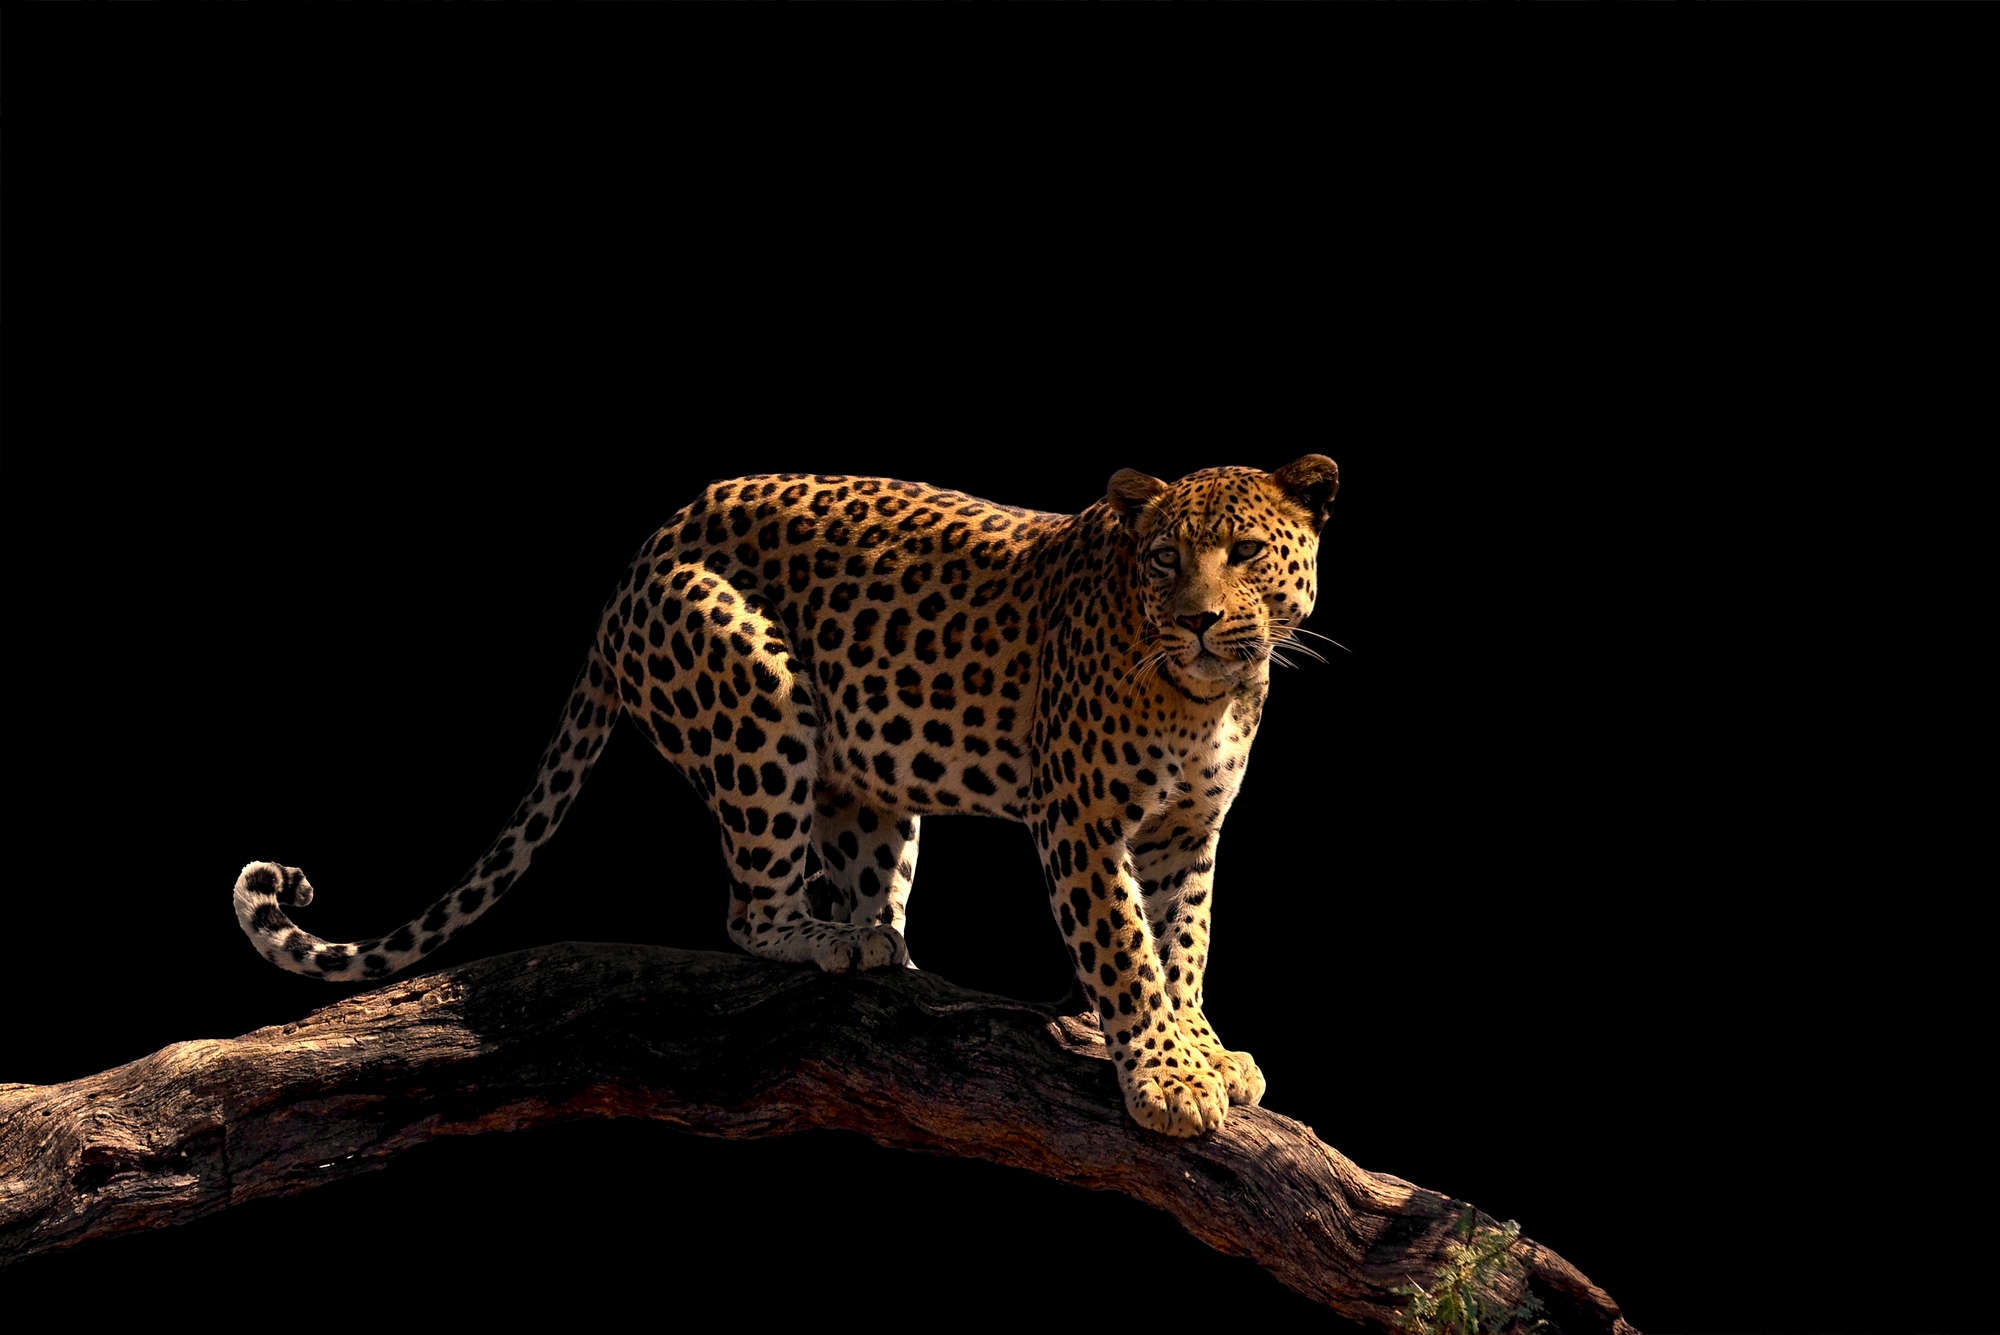             Leopard photo mural standing on a branch on premium smooth vinyl
        